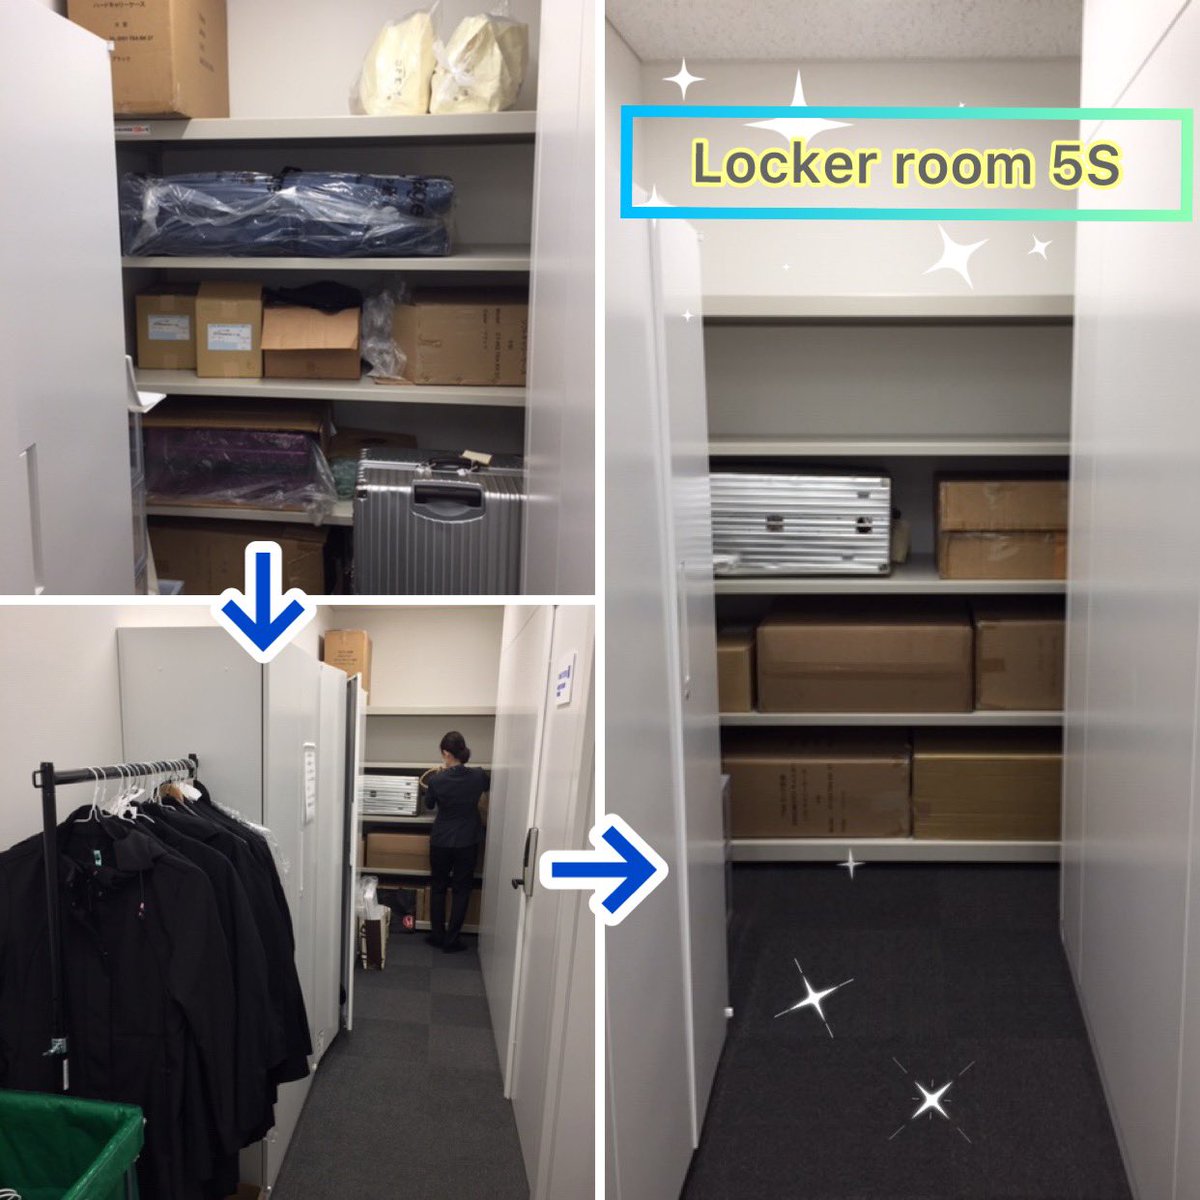 HND SAT members are looking for opportunities to clean and organize things every day!  Here is what they’ve done for our locker room😊 @JT67977409 @keiichi_hirao @BaldeviaEilis @UAPacificSafety #spring5scompetition